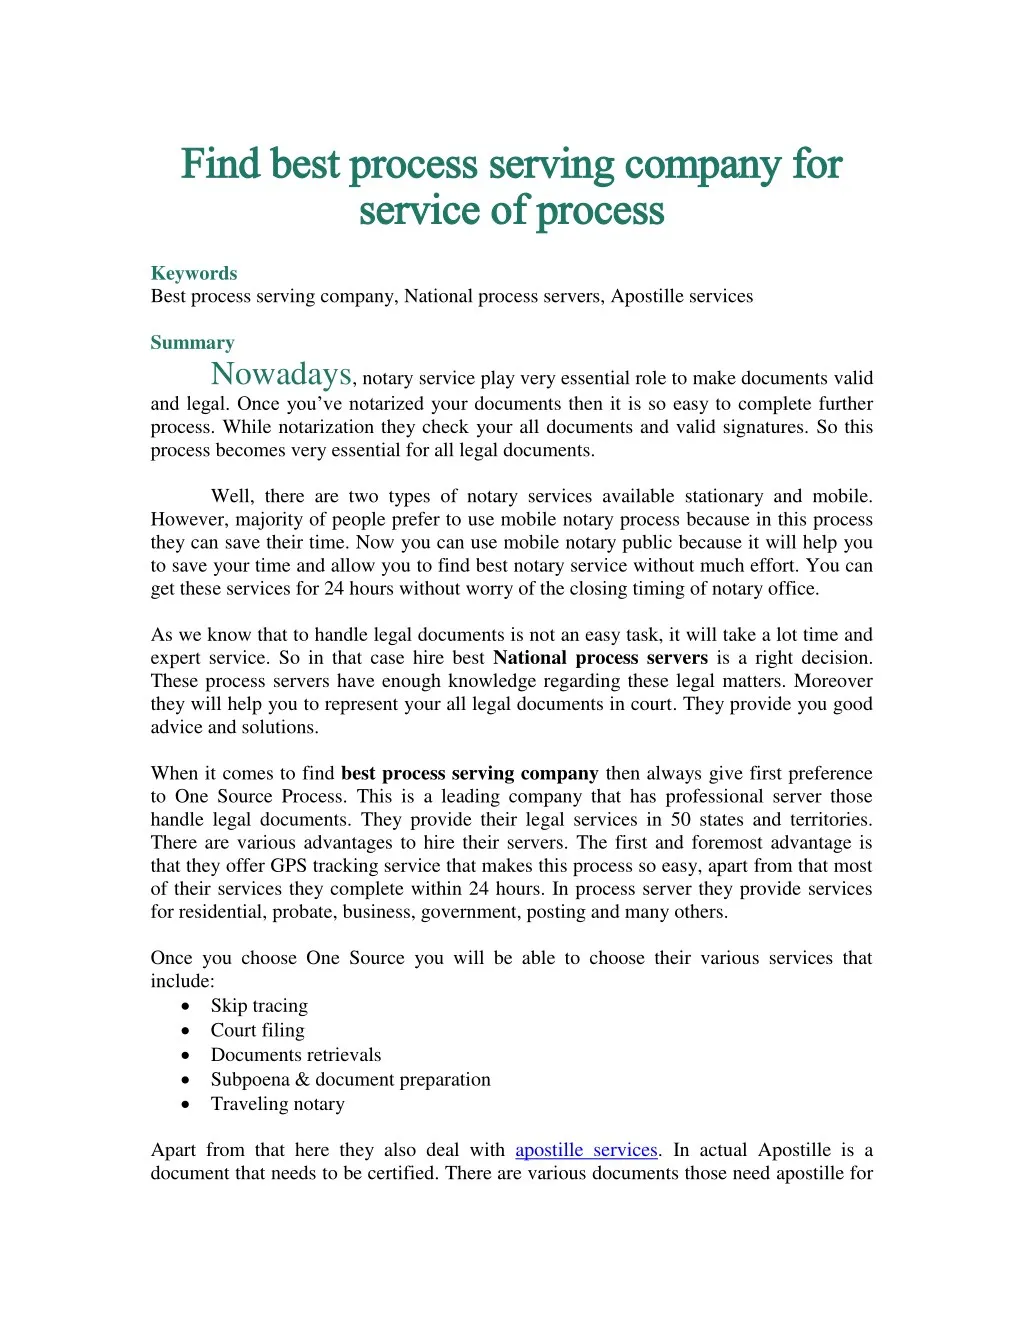 find find best process serving company for best